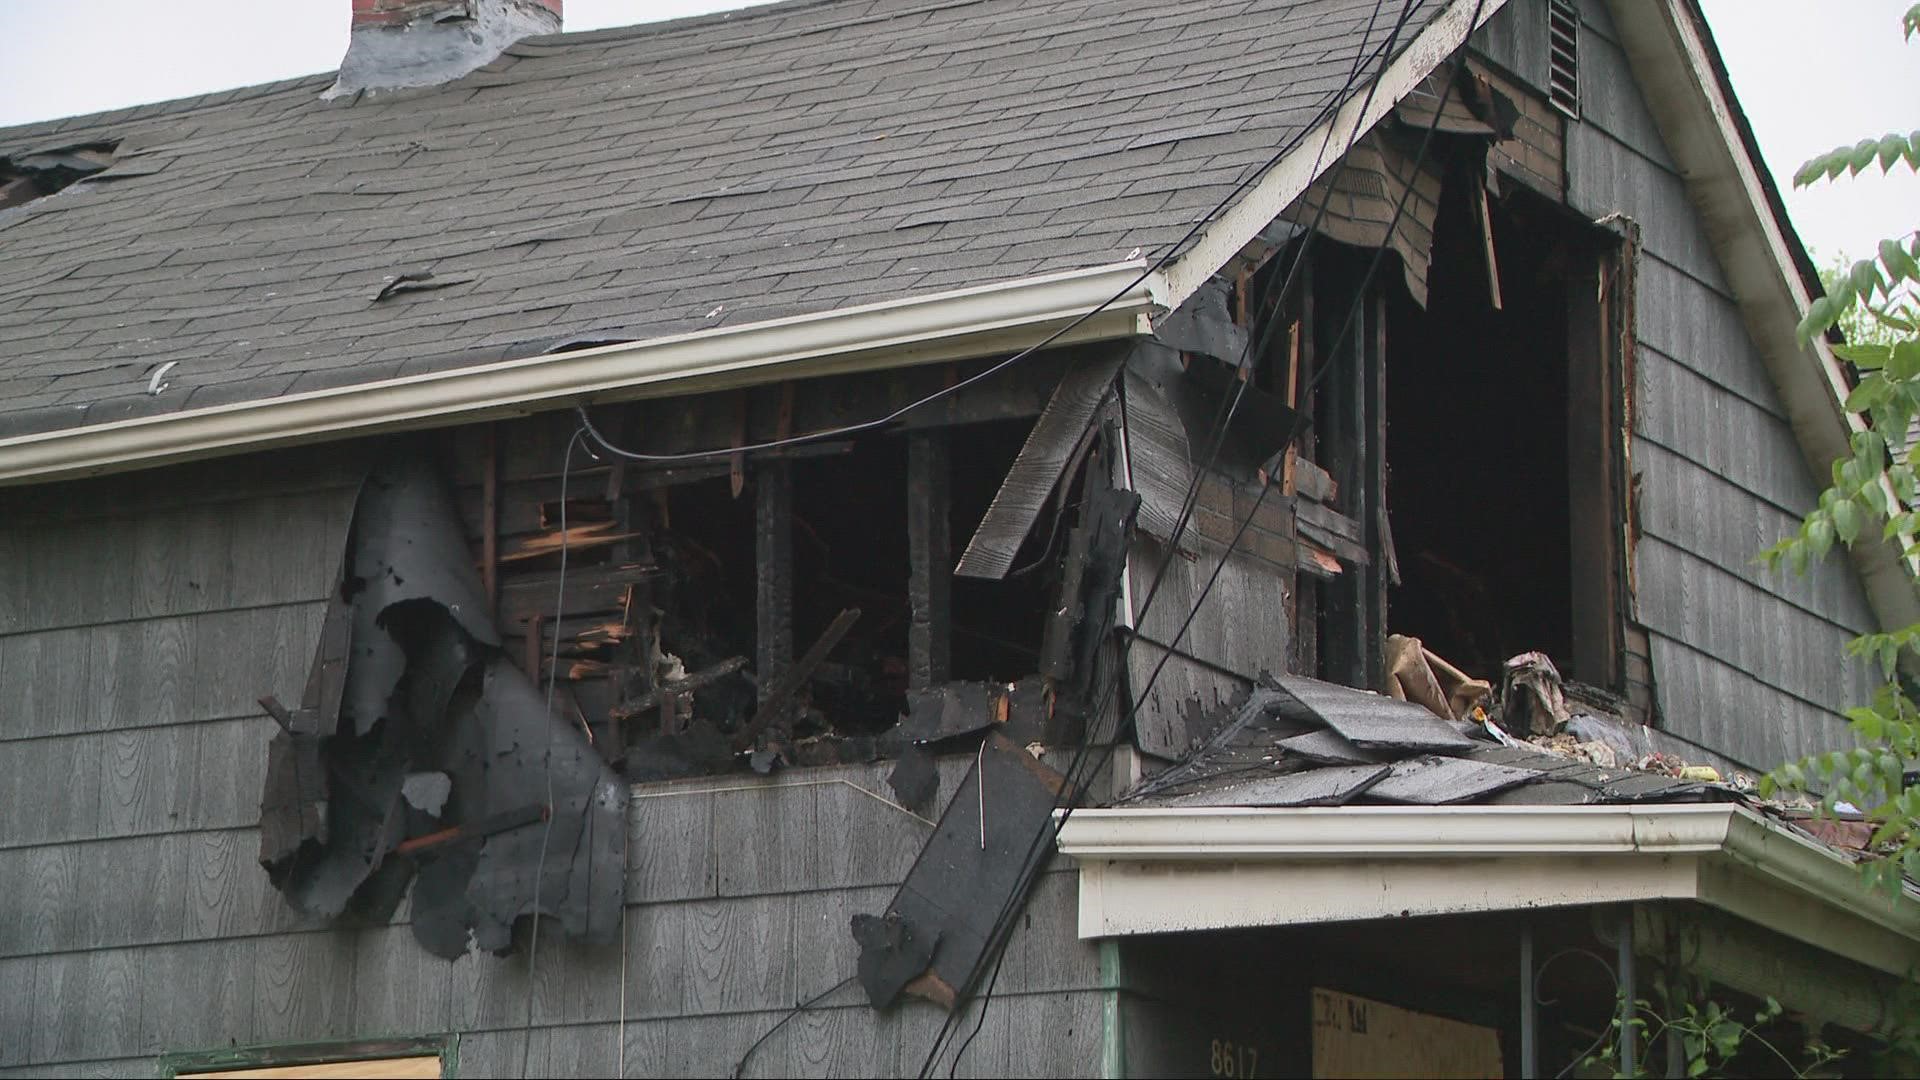 Fire officials say the 68-year-old woman was found upstairs